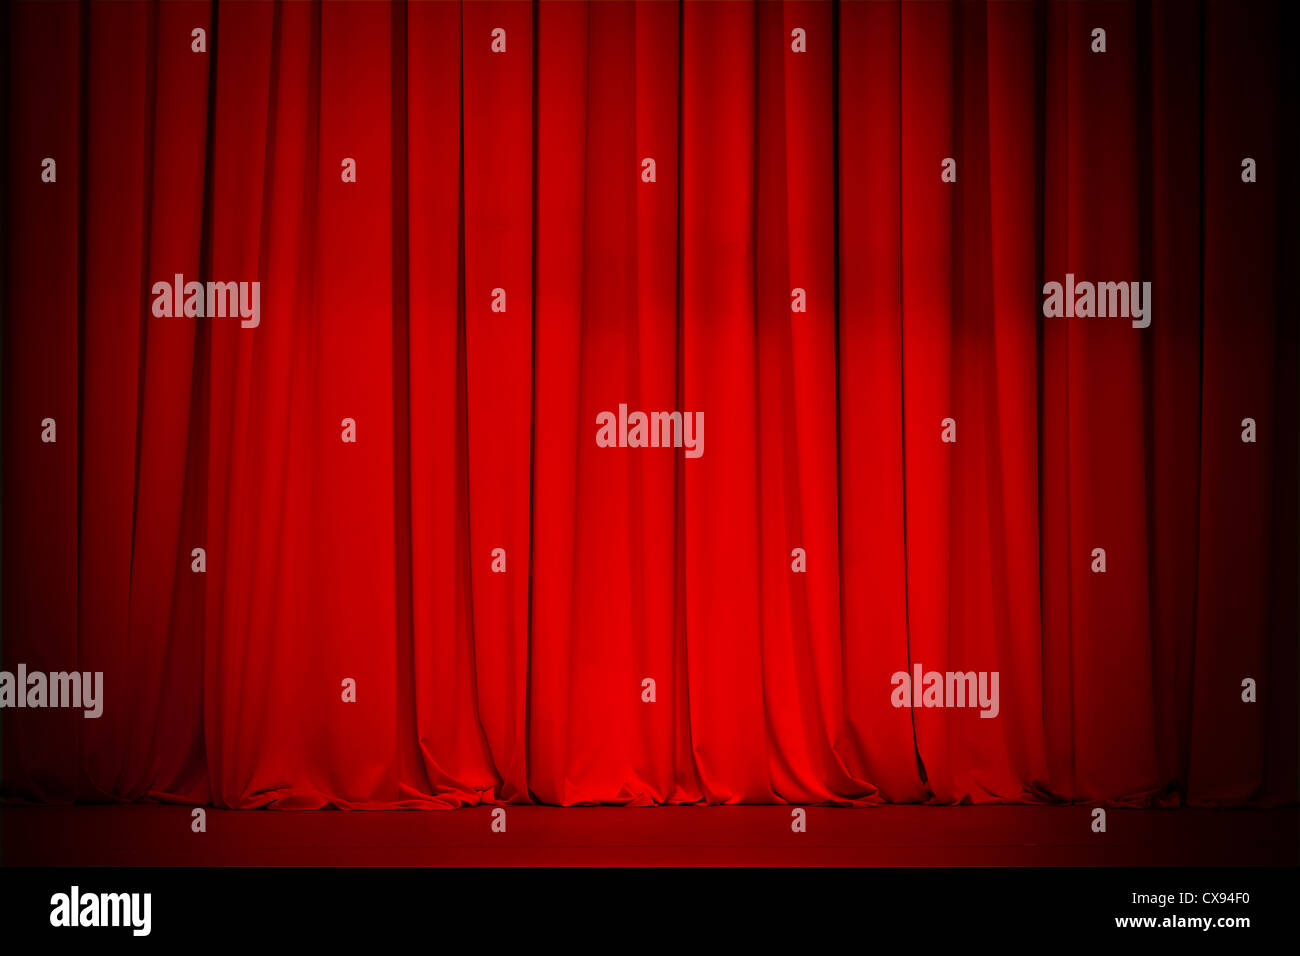 Red curtain background Stock Photo